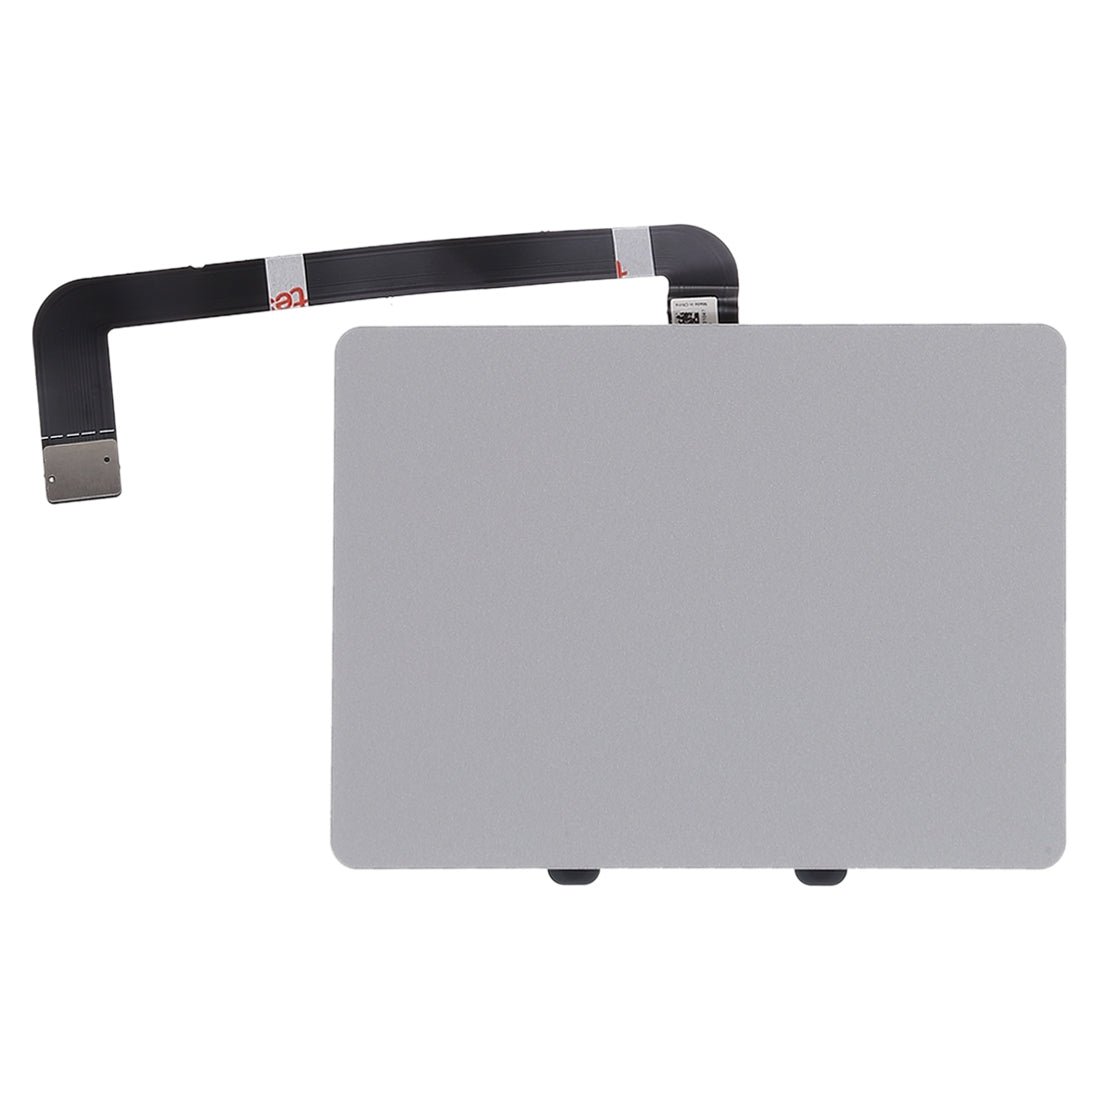 Panel Táctil TouchPad MacBook Pro 15 A1286 MC721 MC723 MD318 MD322 MD103 MD104